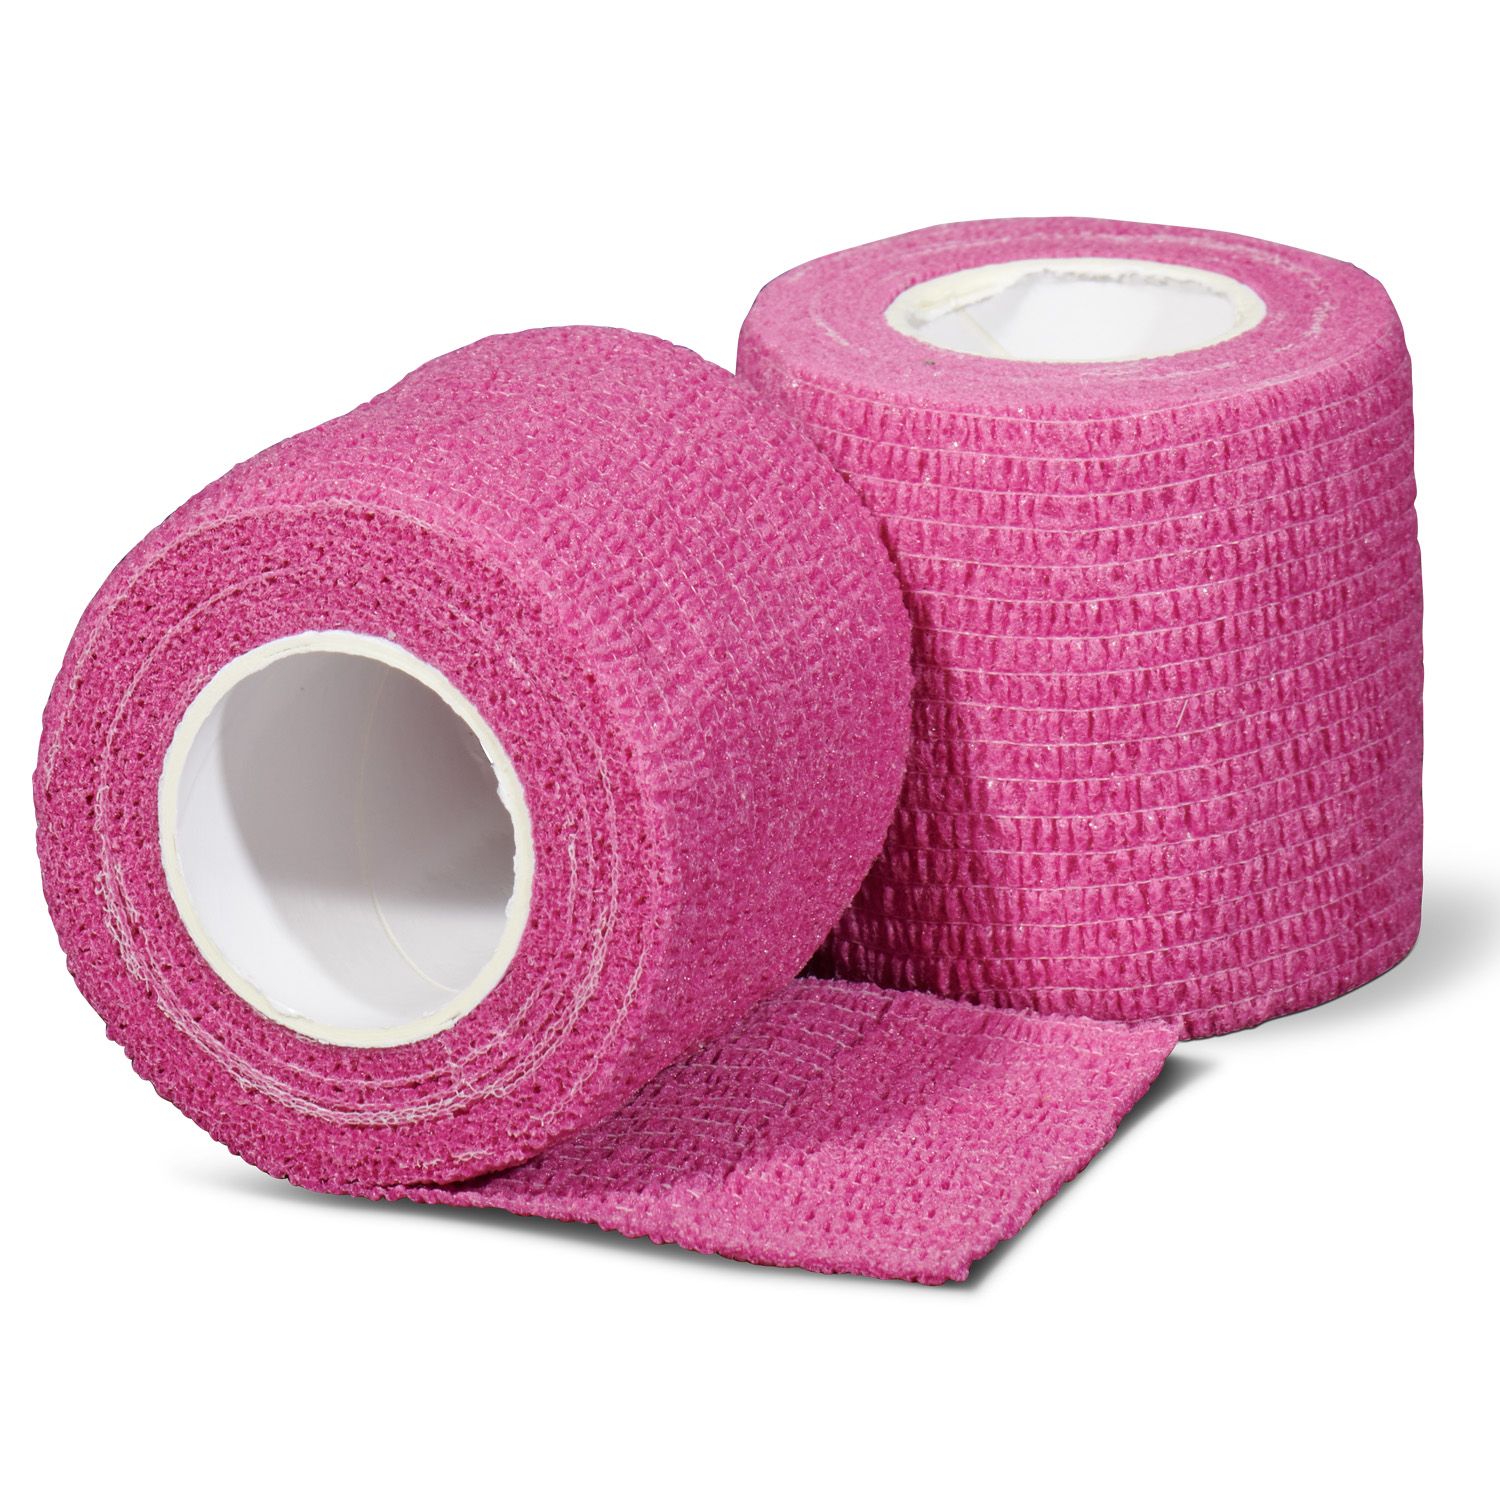 gladiator sports underwrap bandage per roll pink frond and back view